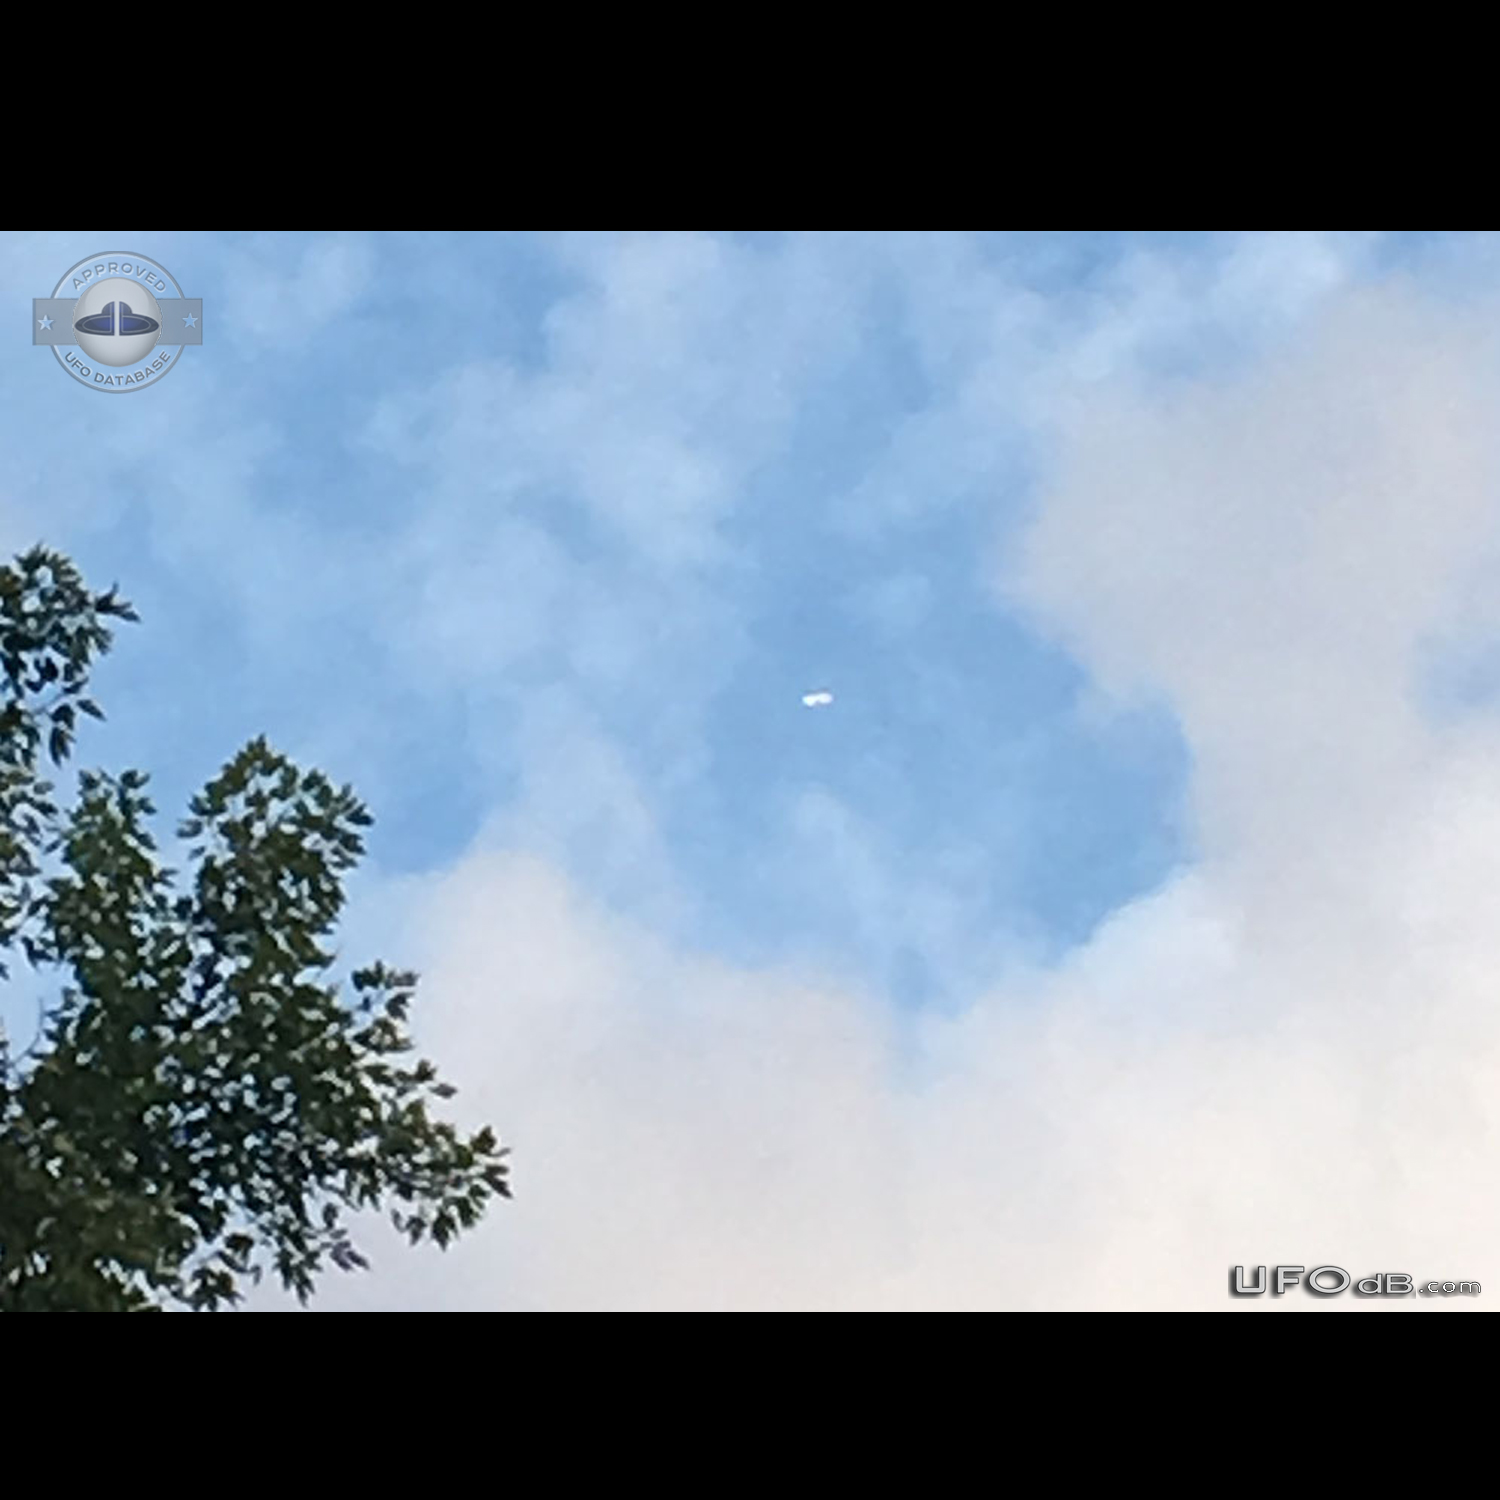 I saw a shiny cigar shaped Ufo in descent through the clouds - Tenness UFO Picture #795-1